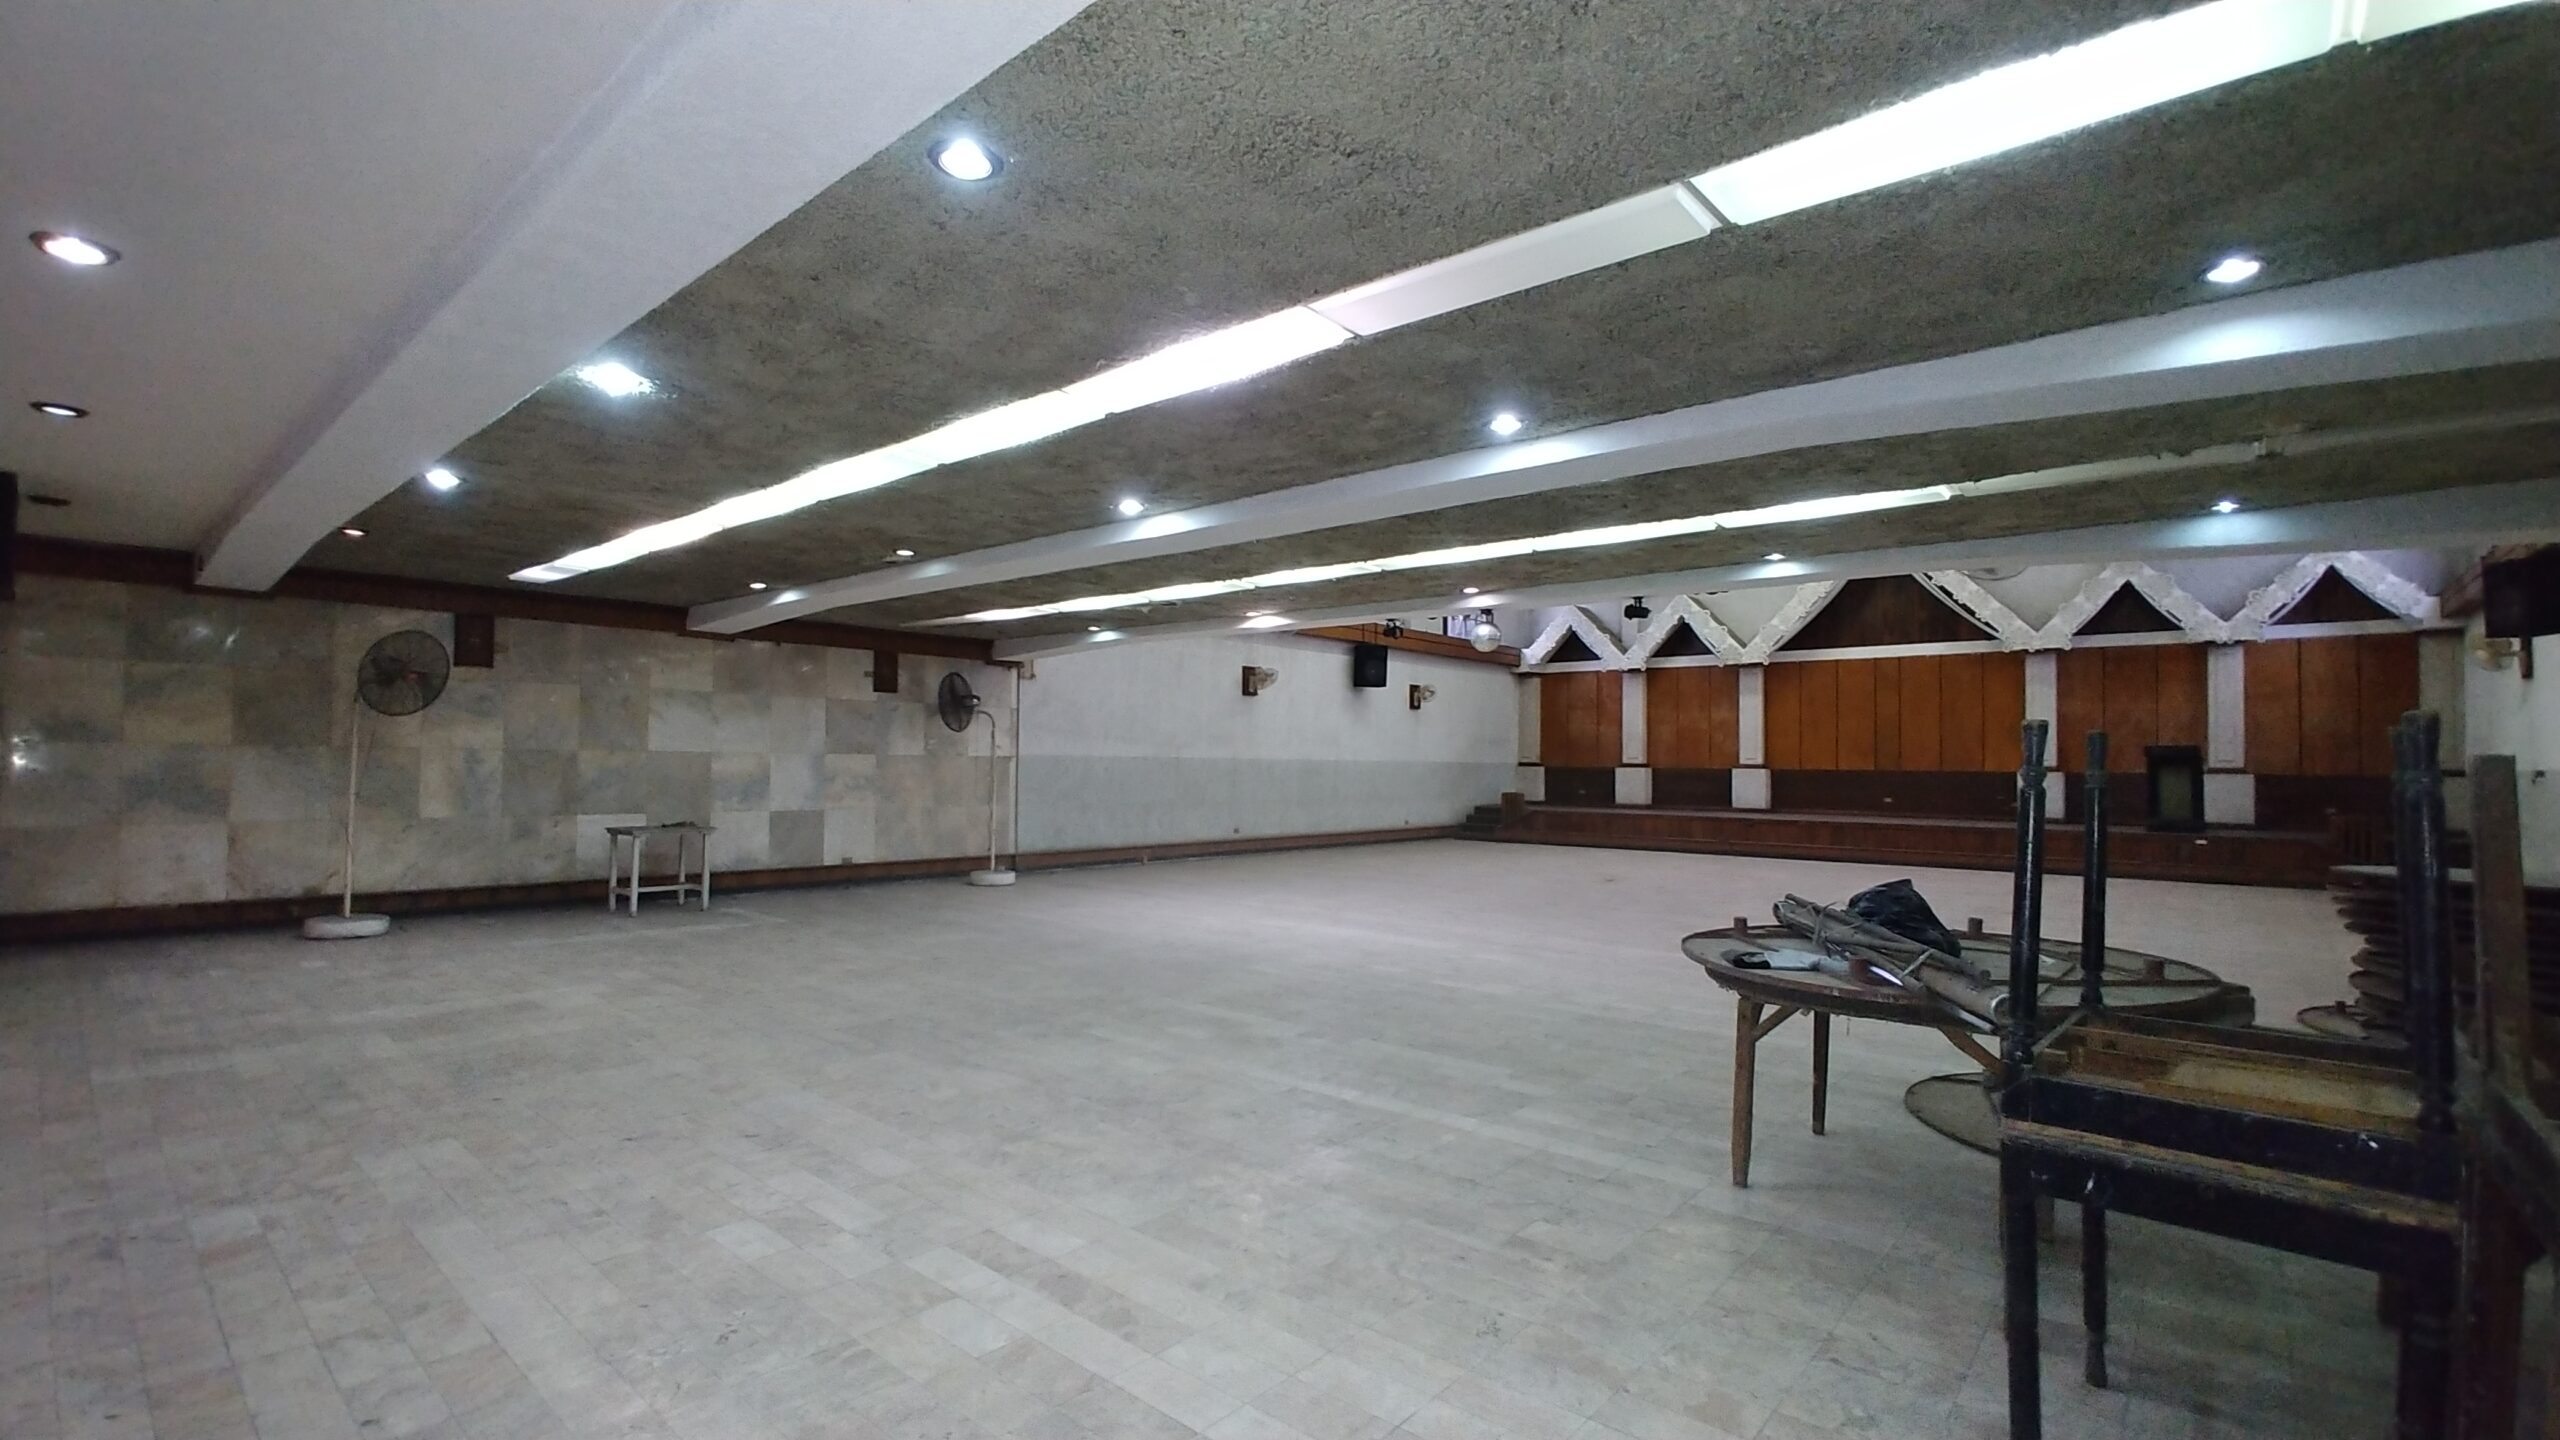 900 sqm Commercial Space for Rent in Dumaguete City Proper